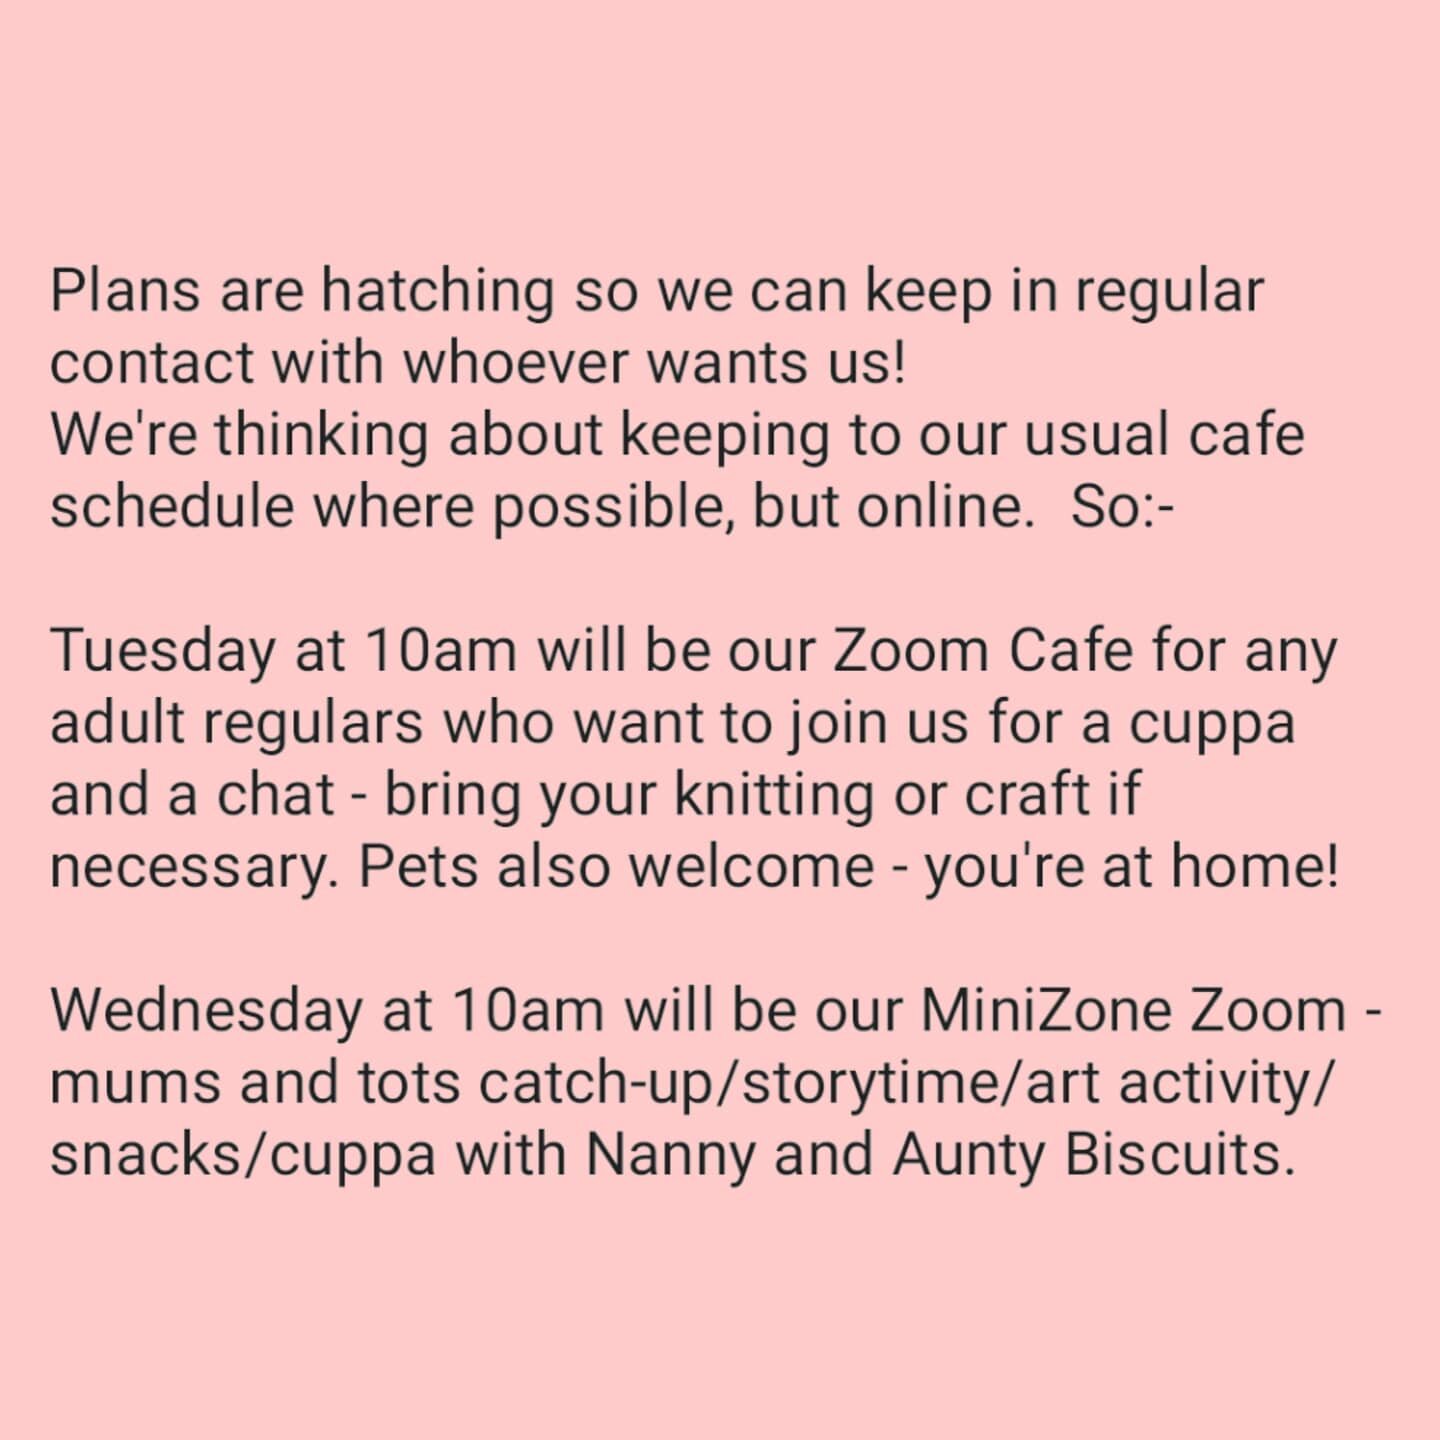 Hello! As the news of lockdown three hits, we'd like to remind everyone we are here (online) to chat, listen and have a laugh. We have swapped our normal cafe schedule for a virtual version - there is something for everyone here, so spread the word! 